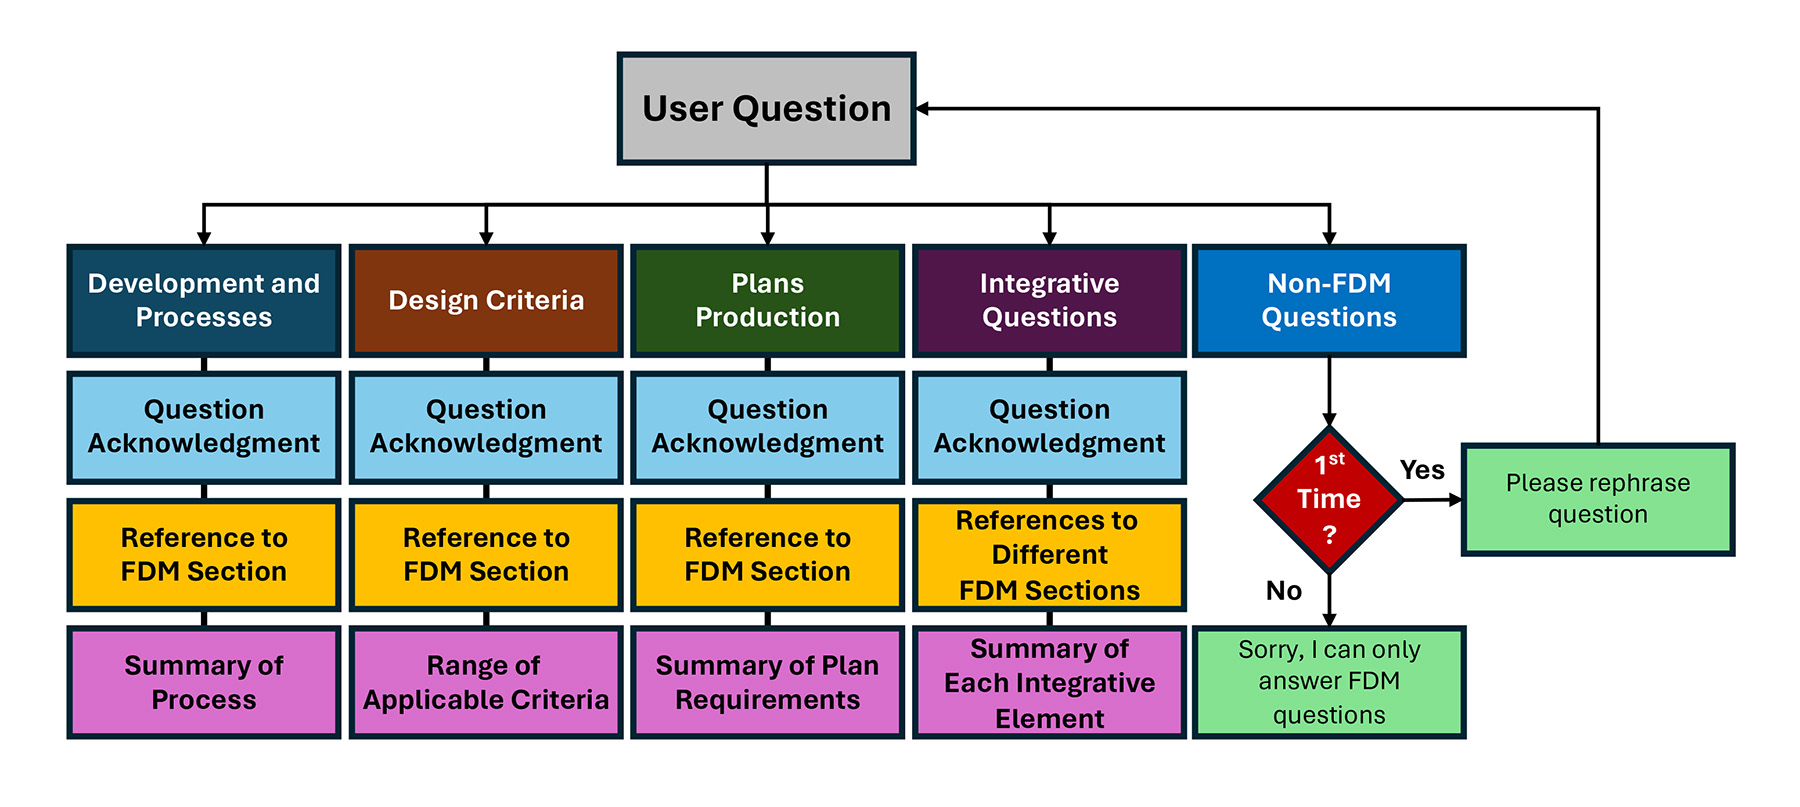 Image shows a simplified workflow of a series of questions and directionals. A user’s question is directed into one of five buckets: development and processes questions, design criteria questions, plans production questions, and general integrative design questions. There is an implicit fifth category, the “I don’t know the answer” bin. 